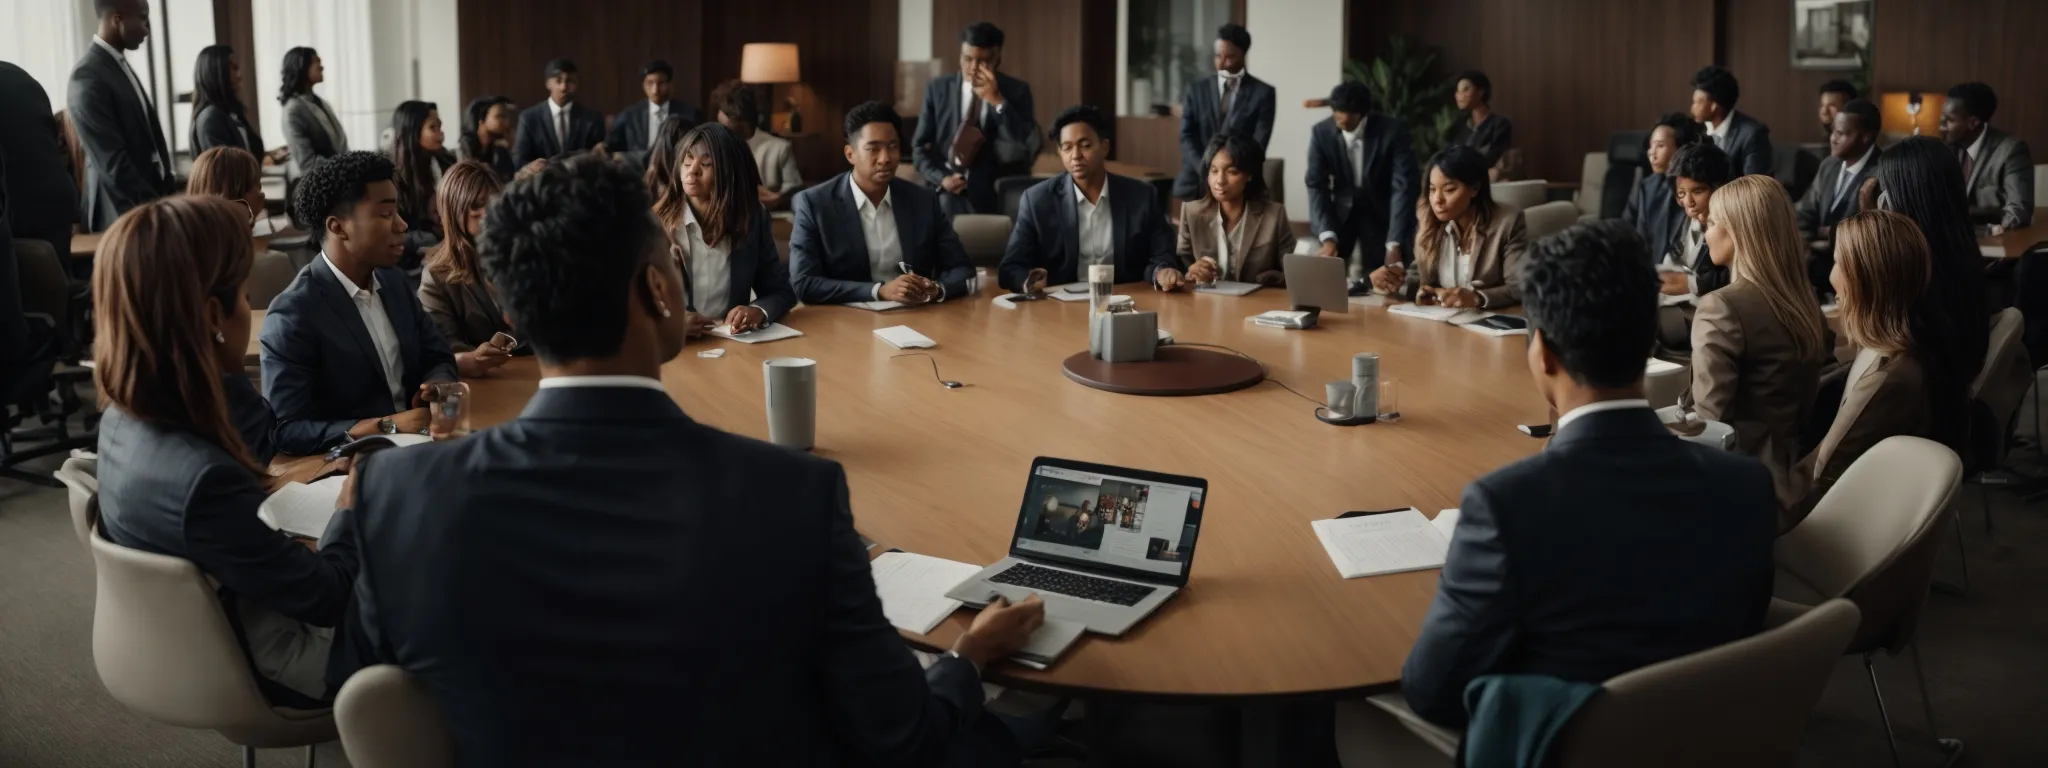 a round conference table with diverse individuals actively engaged in a collaborative discussion with digital devices and marketing materials.